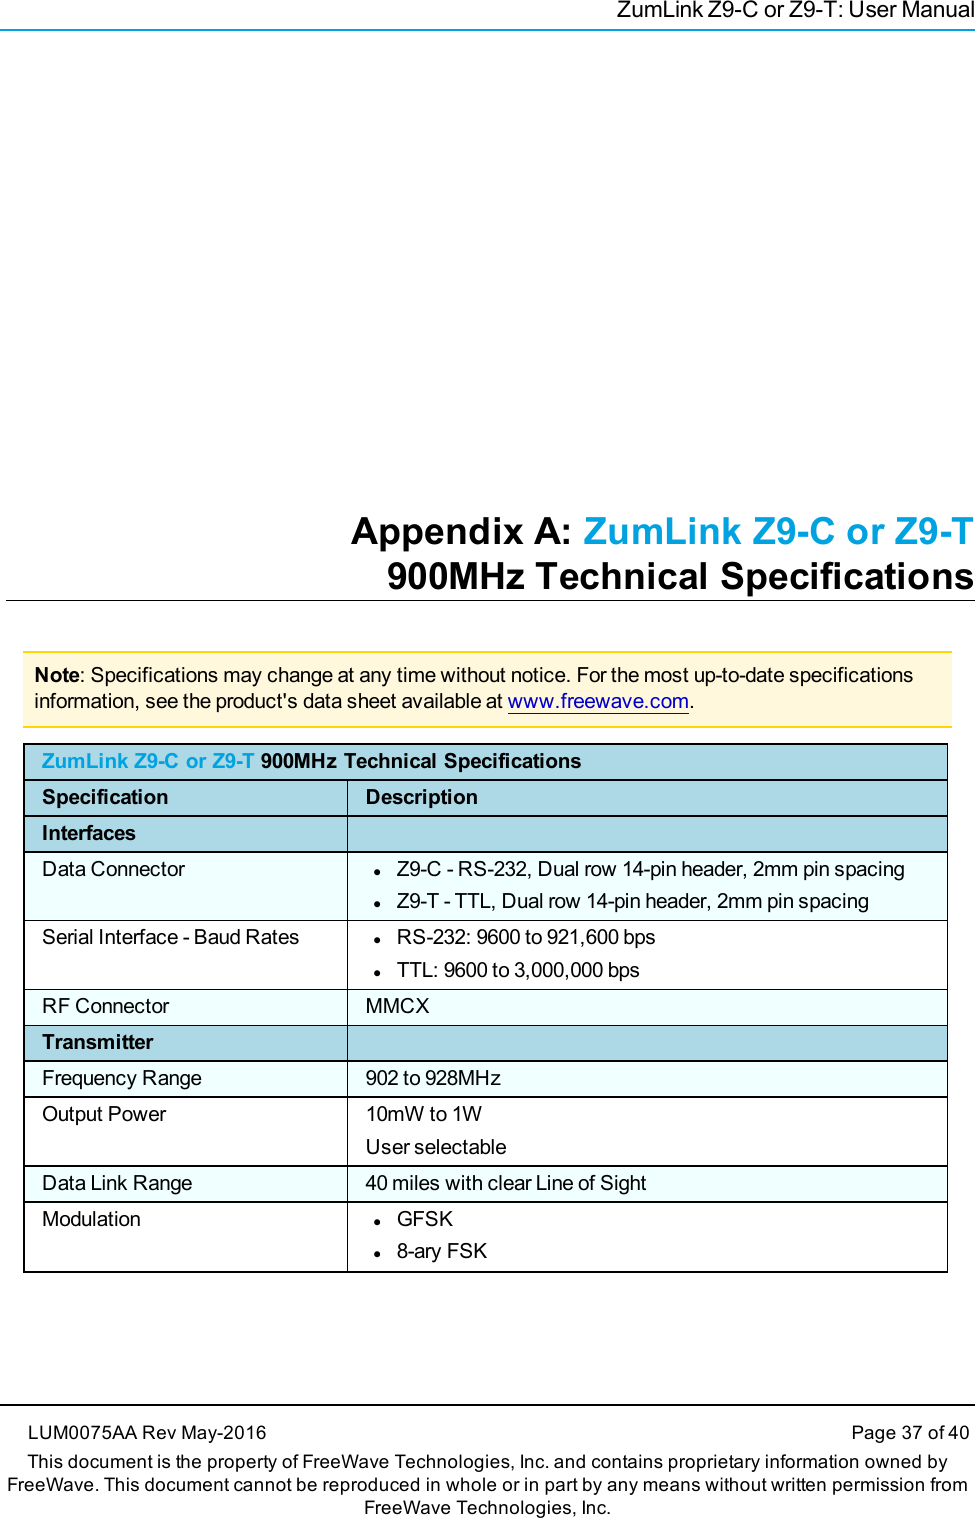 ZumLink Z9-C or Z9-T: User ManualAppendix A: ZumLink Z9-C or Z9-T900MHz Technical SpecificationsNote: Specifications may change at any time without notice. For the most up-to-date specificationsinformation, see the product&apos;s data sheet available at www.freewave.com.ZumLink Z9-C or Z9-T 900MHz Technical SpecificationsSpecification DescriptionInterfacesData Connector lZ9-C - RS-232, Dual row 14-pin header, 2mm pin spacinglZ9-T - TTL, Dual row 14-pin header, 2mm pin spacingSerial Interface - Baud Rates lRS-232: 9600 to 921,600 bpslTTL: 9600 to 3,000,000 bpsRF Connector MMCXTransmitterFrequency Range 902 to 928MHzOutput Power 10mW to 1WUser selectableData Link Range 40 miles with clear Line of SightModulation lGFSKl8-ary FSKLUM0075AA Rev May-2016 Page 37 of 40This document is the property of FreeWave Technologies, Inc. and contains proprietary information owned byFreeWave. This document cannot be reproduced in whole or in part by any means without written permission fromFreeWave Technologies, Inc.